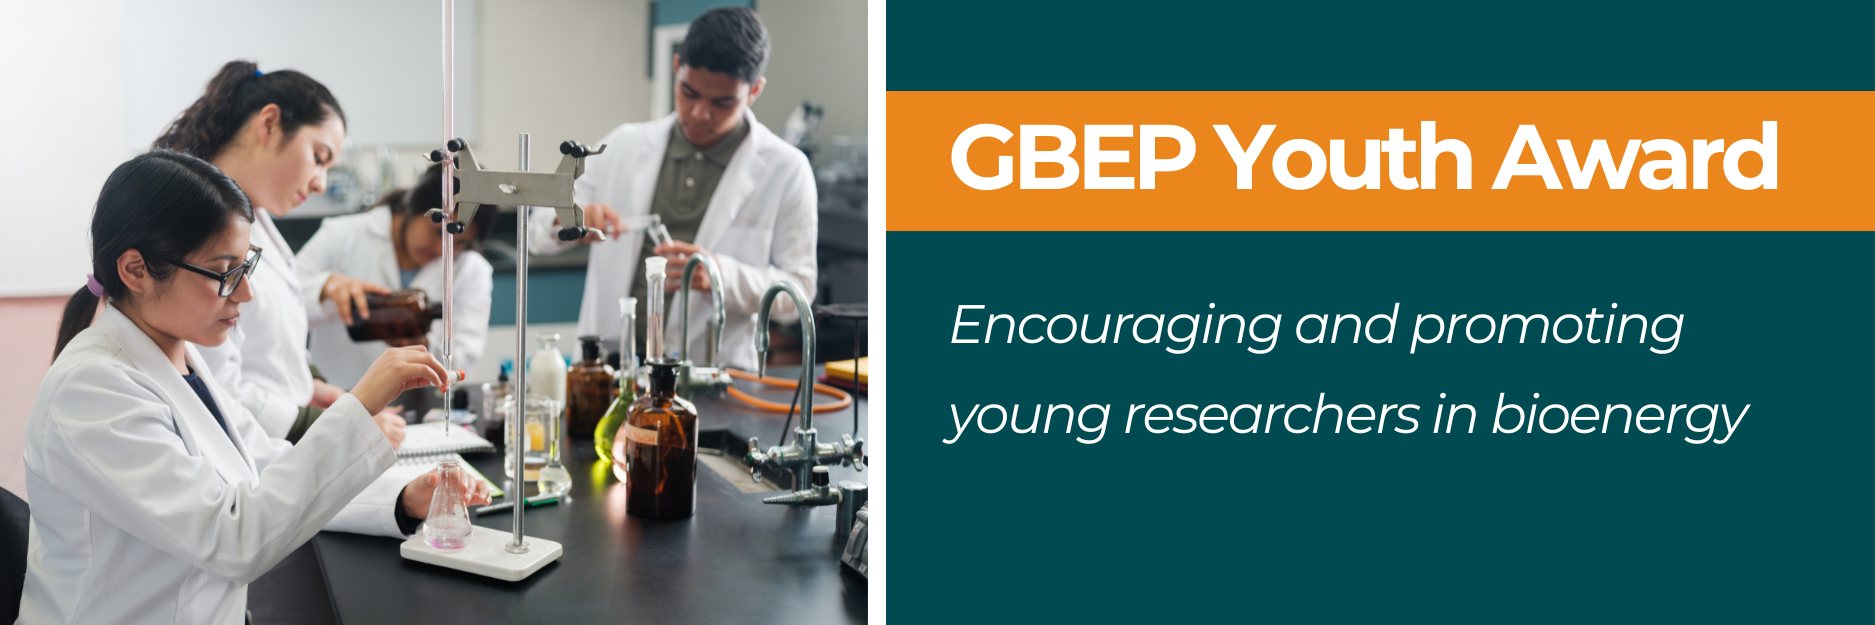 GBEP Youth Award - Encouraging young researcher in bioenergy